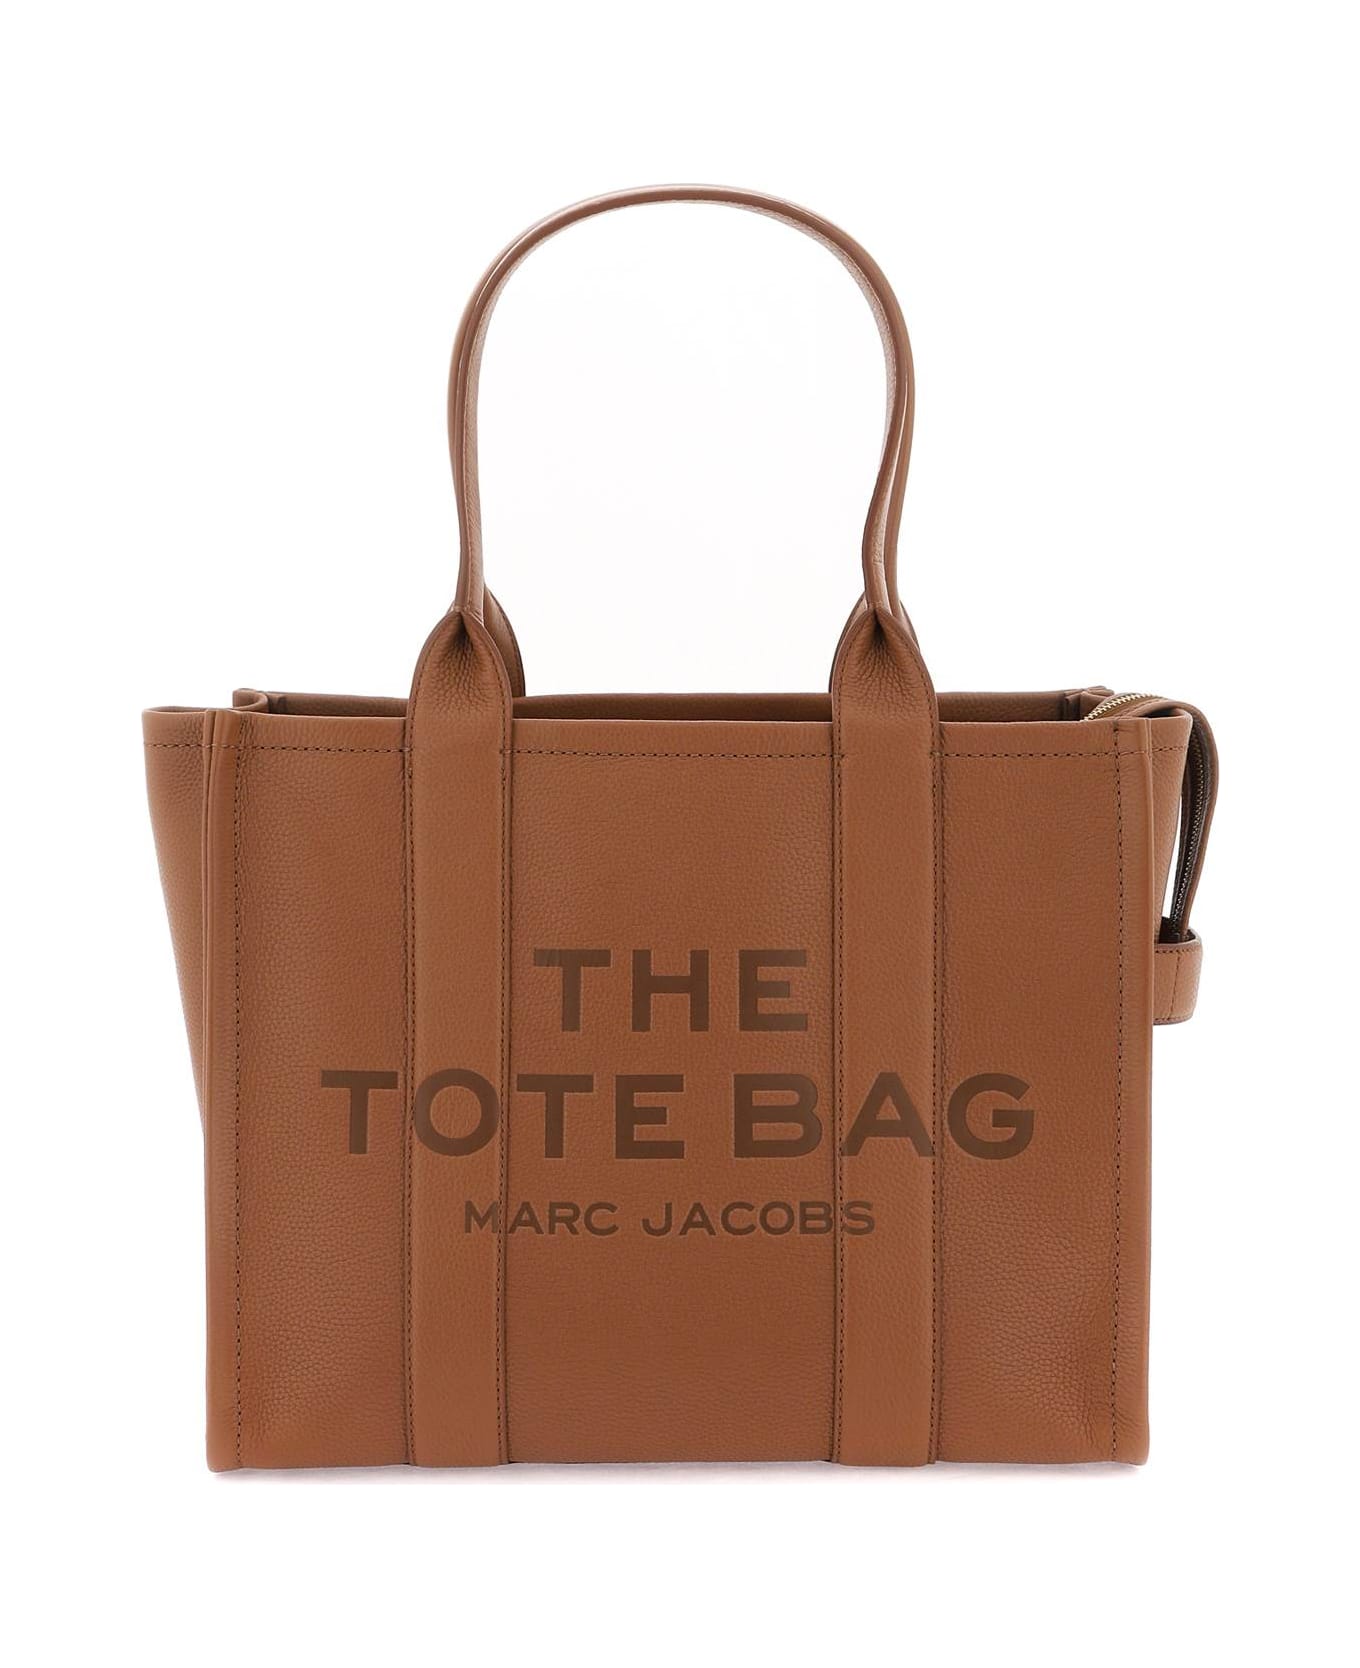 Marc Jacobs The Large Tote Bag - ARGAN OIL (Brown) トートバッグ